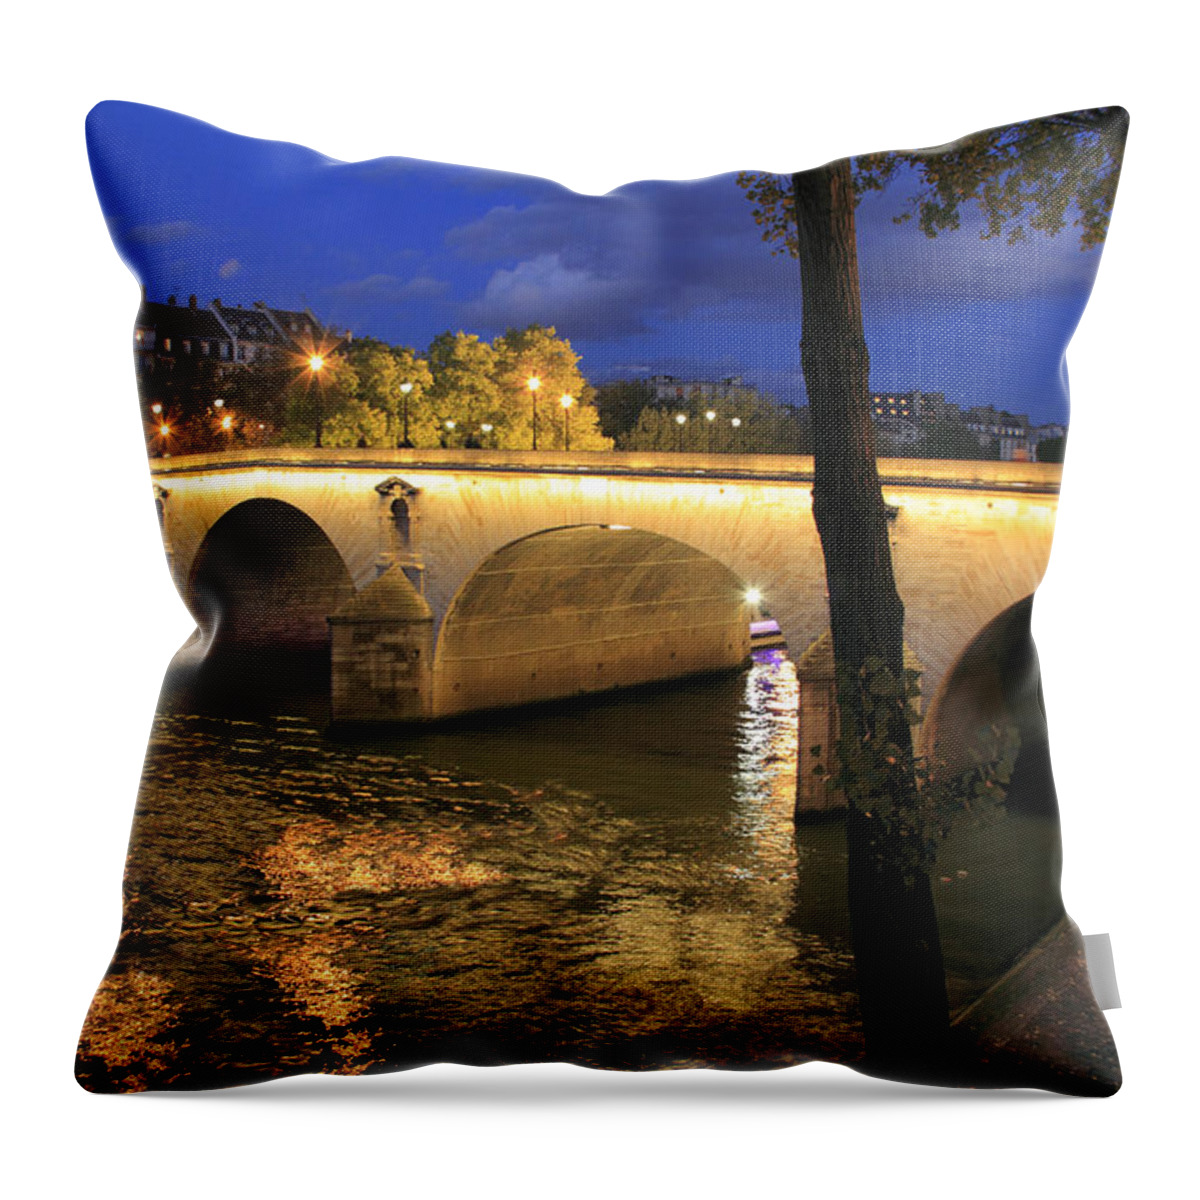 Old Town Throw Pillow featuring the photograph Bridge Crossing The Seine River by John Kieffer